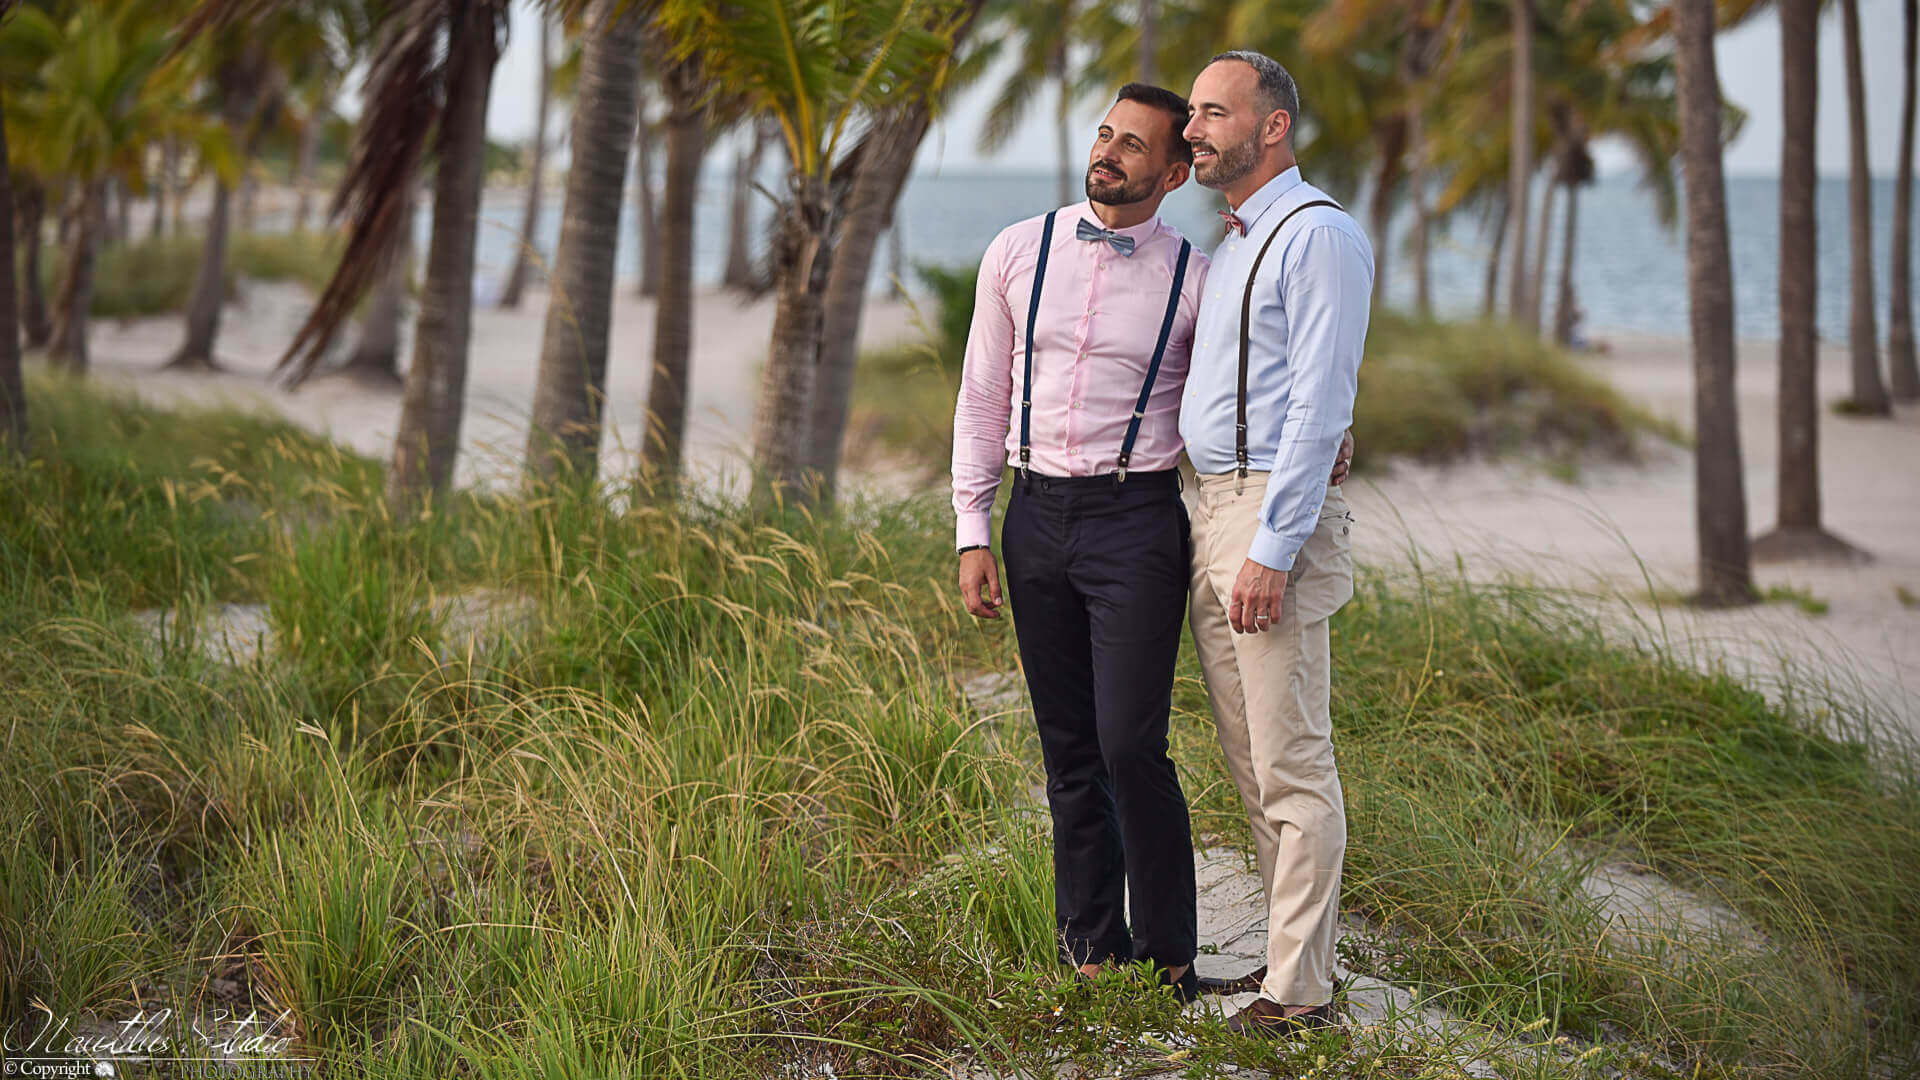 Gay wedding photo Florida showing two grooms under Palm trees on their wedding day